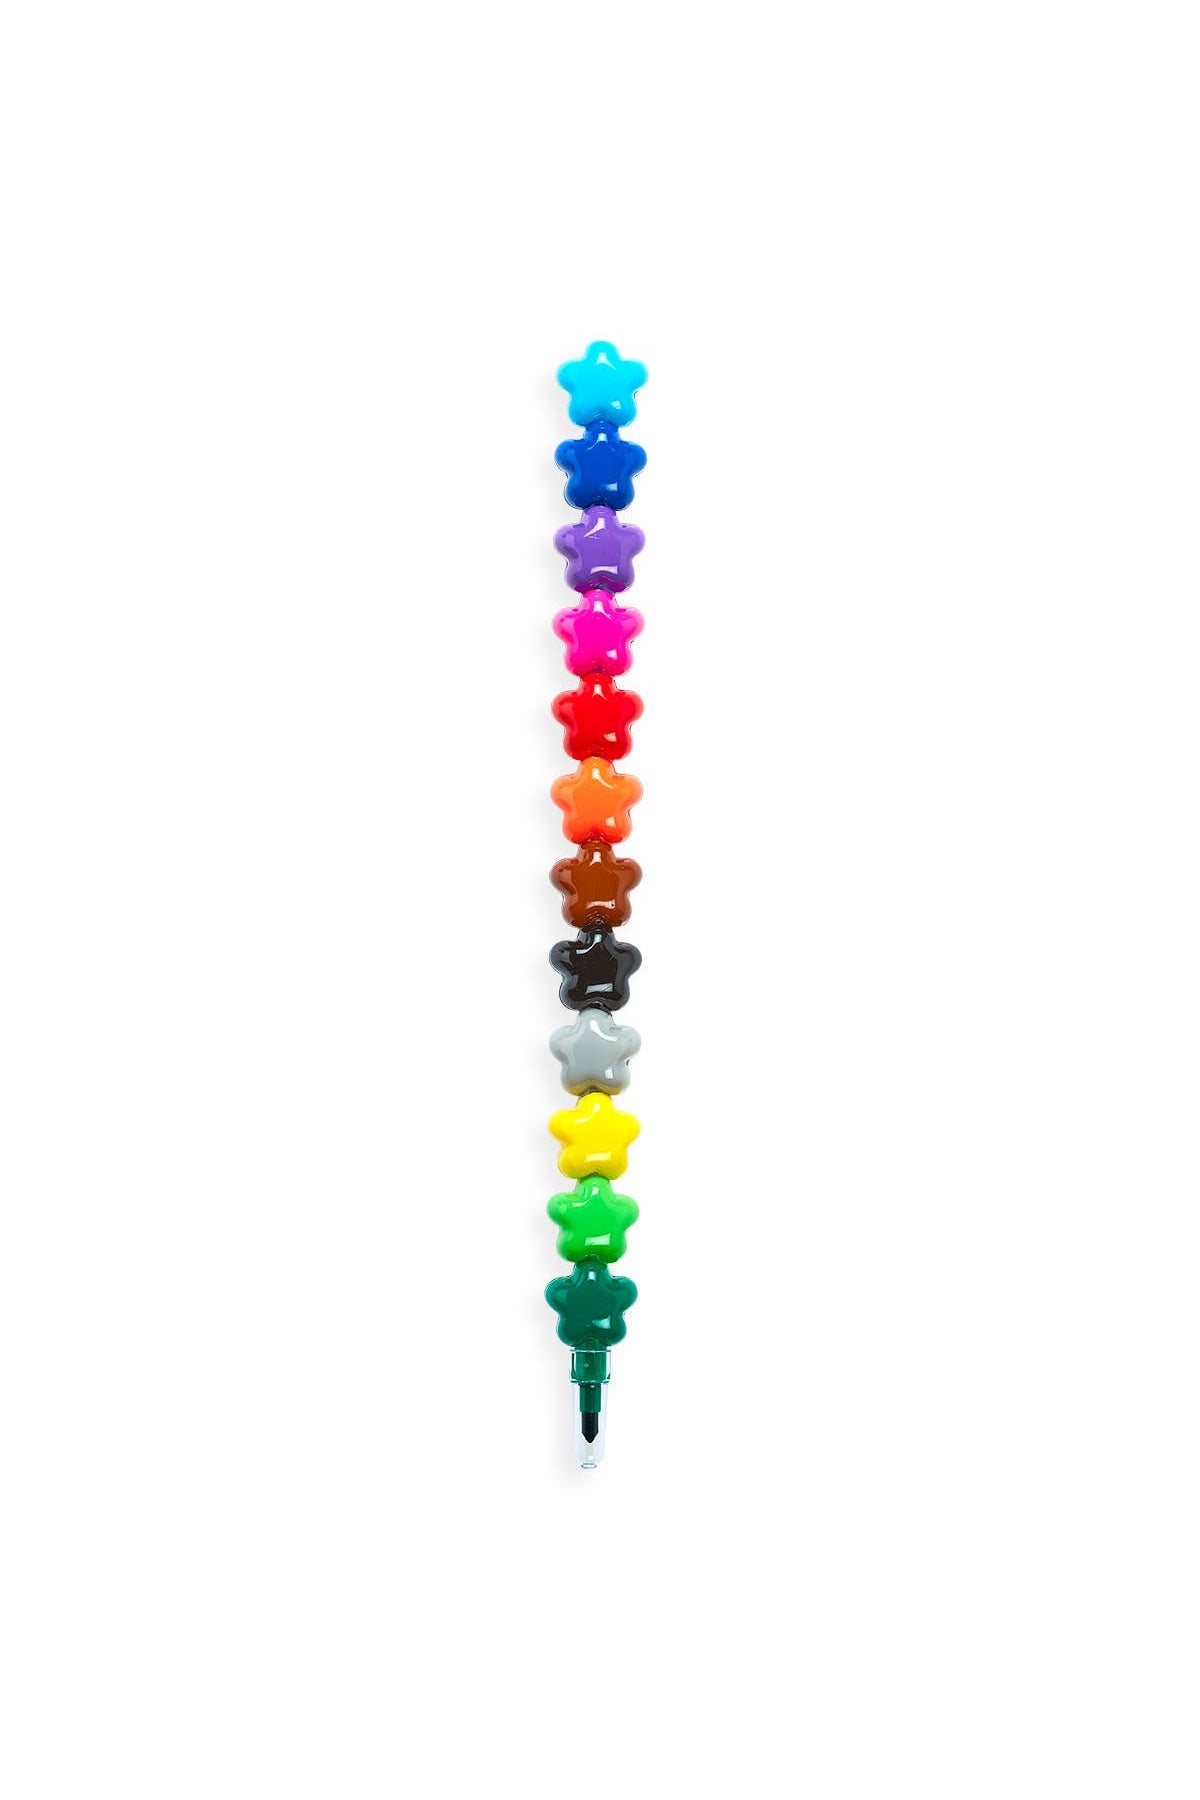 Stackable Crayon Add On — Chicken Scratch N Sniff